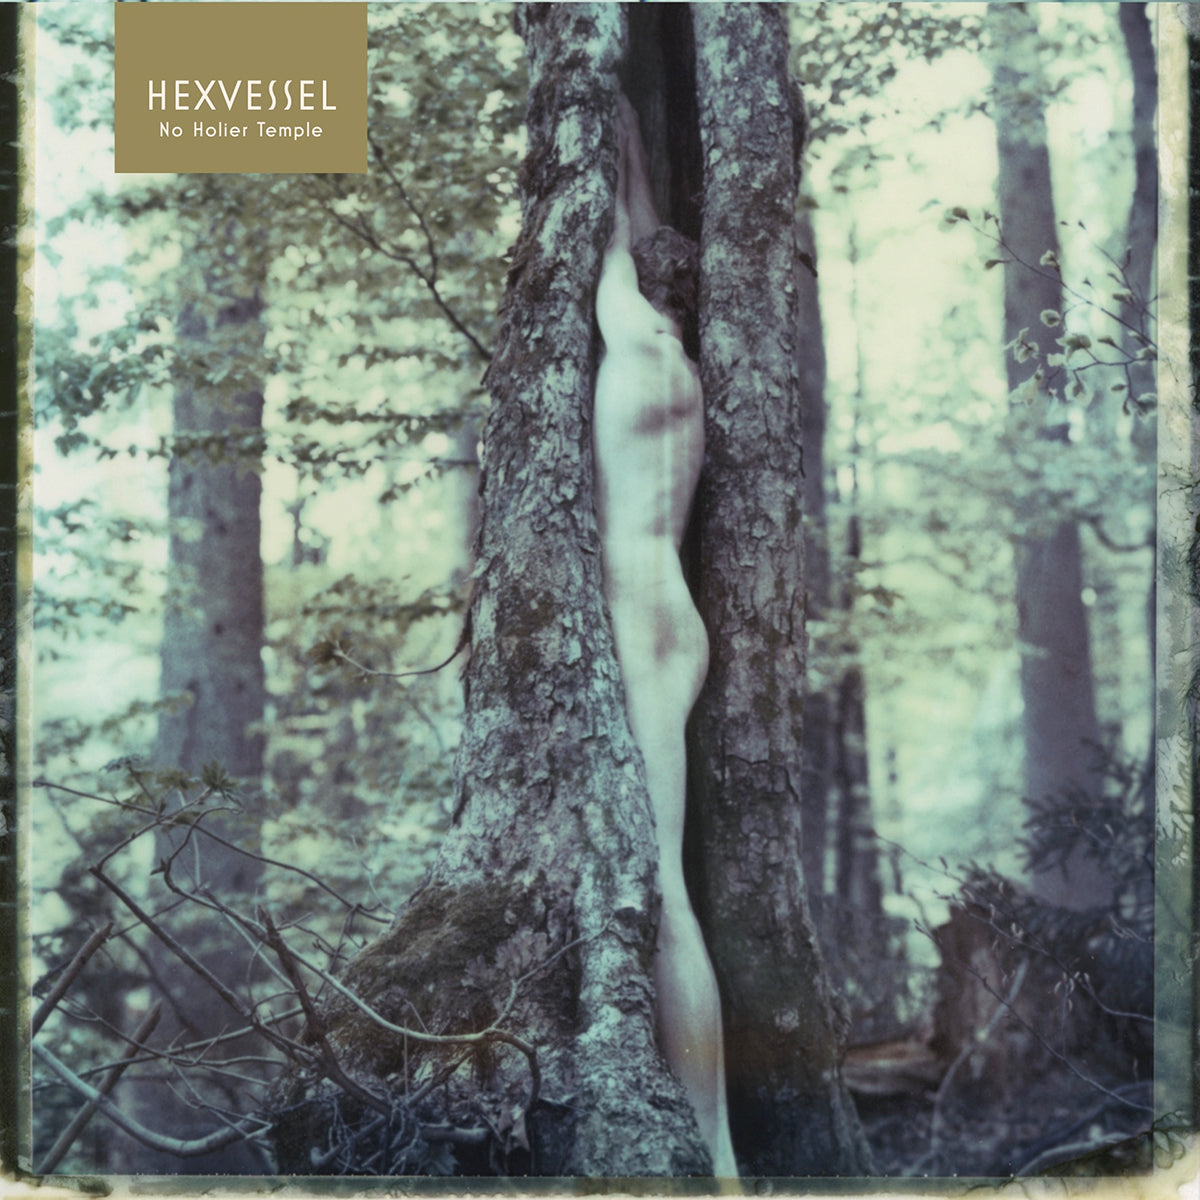 HEXVESSEL "No Holier Temple" CD